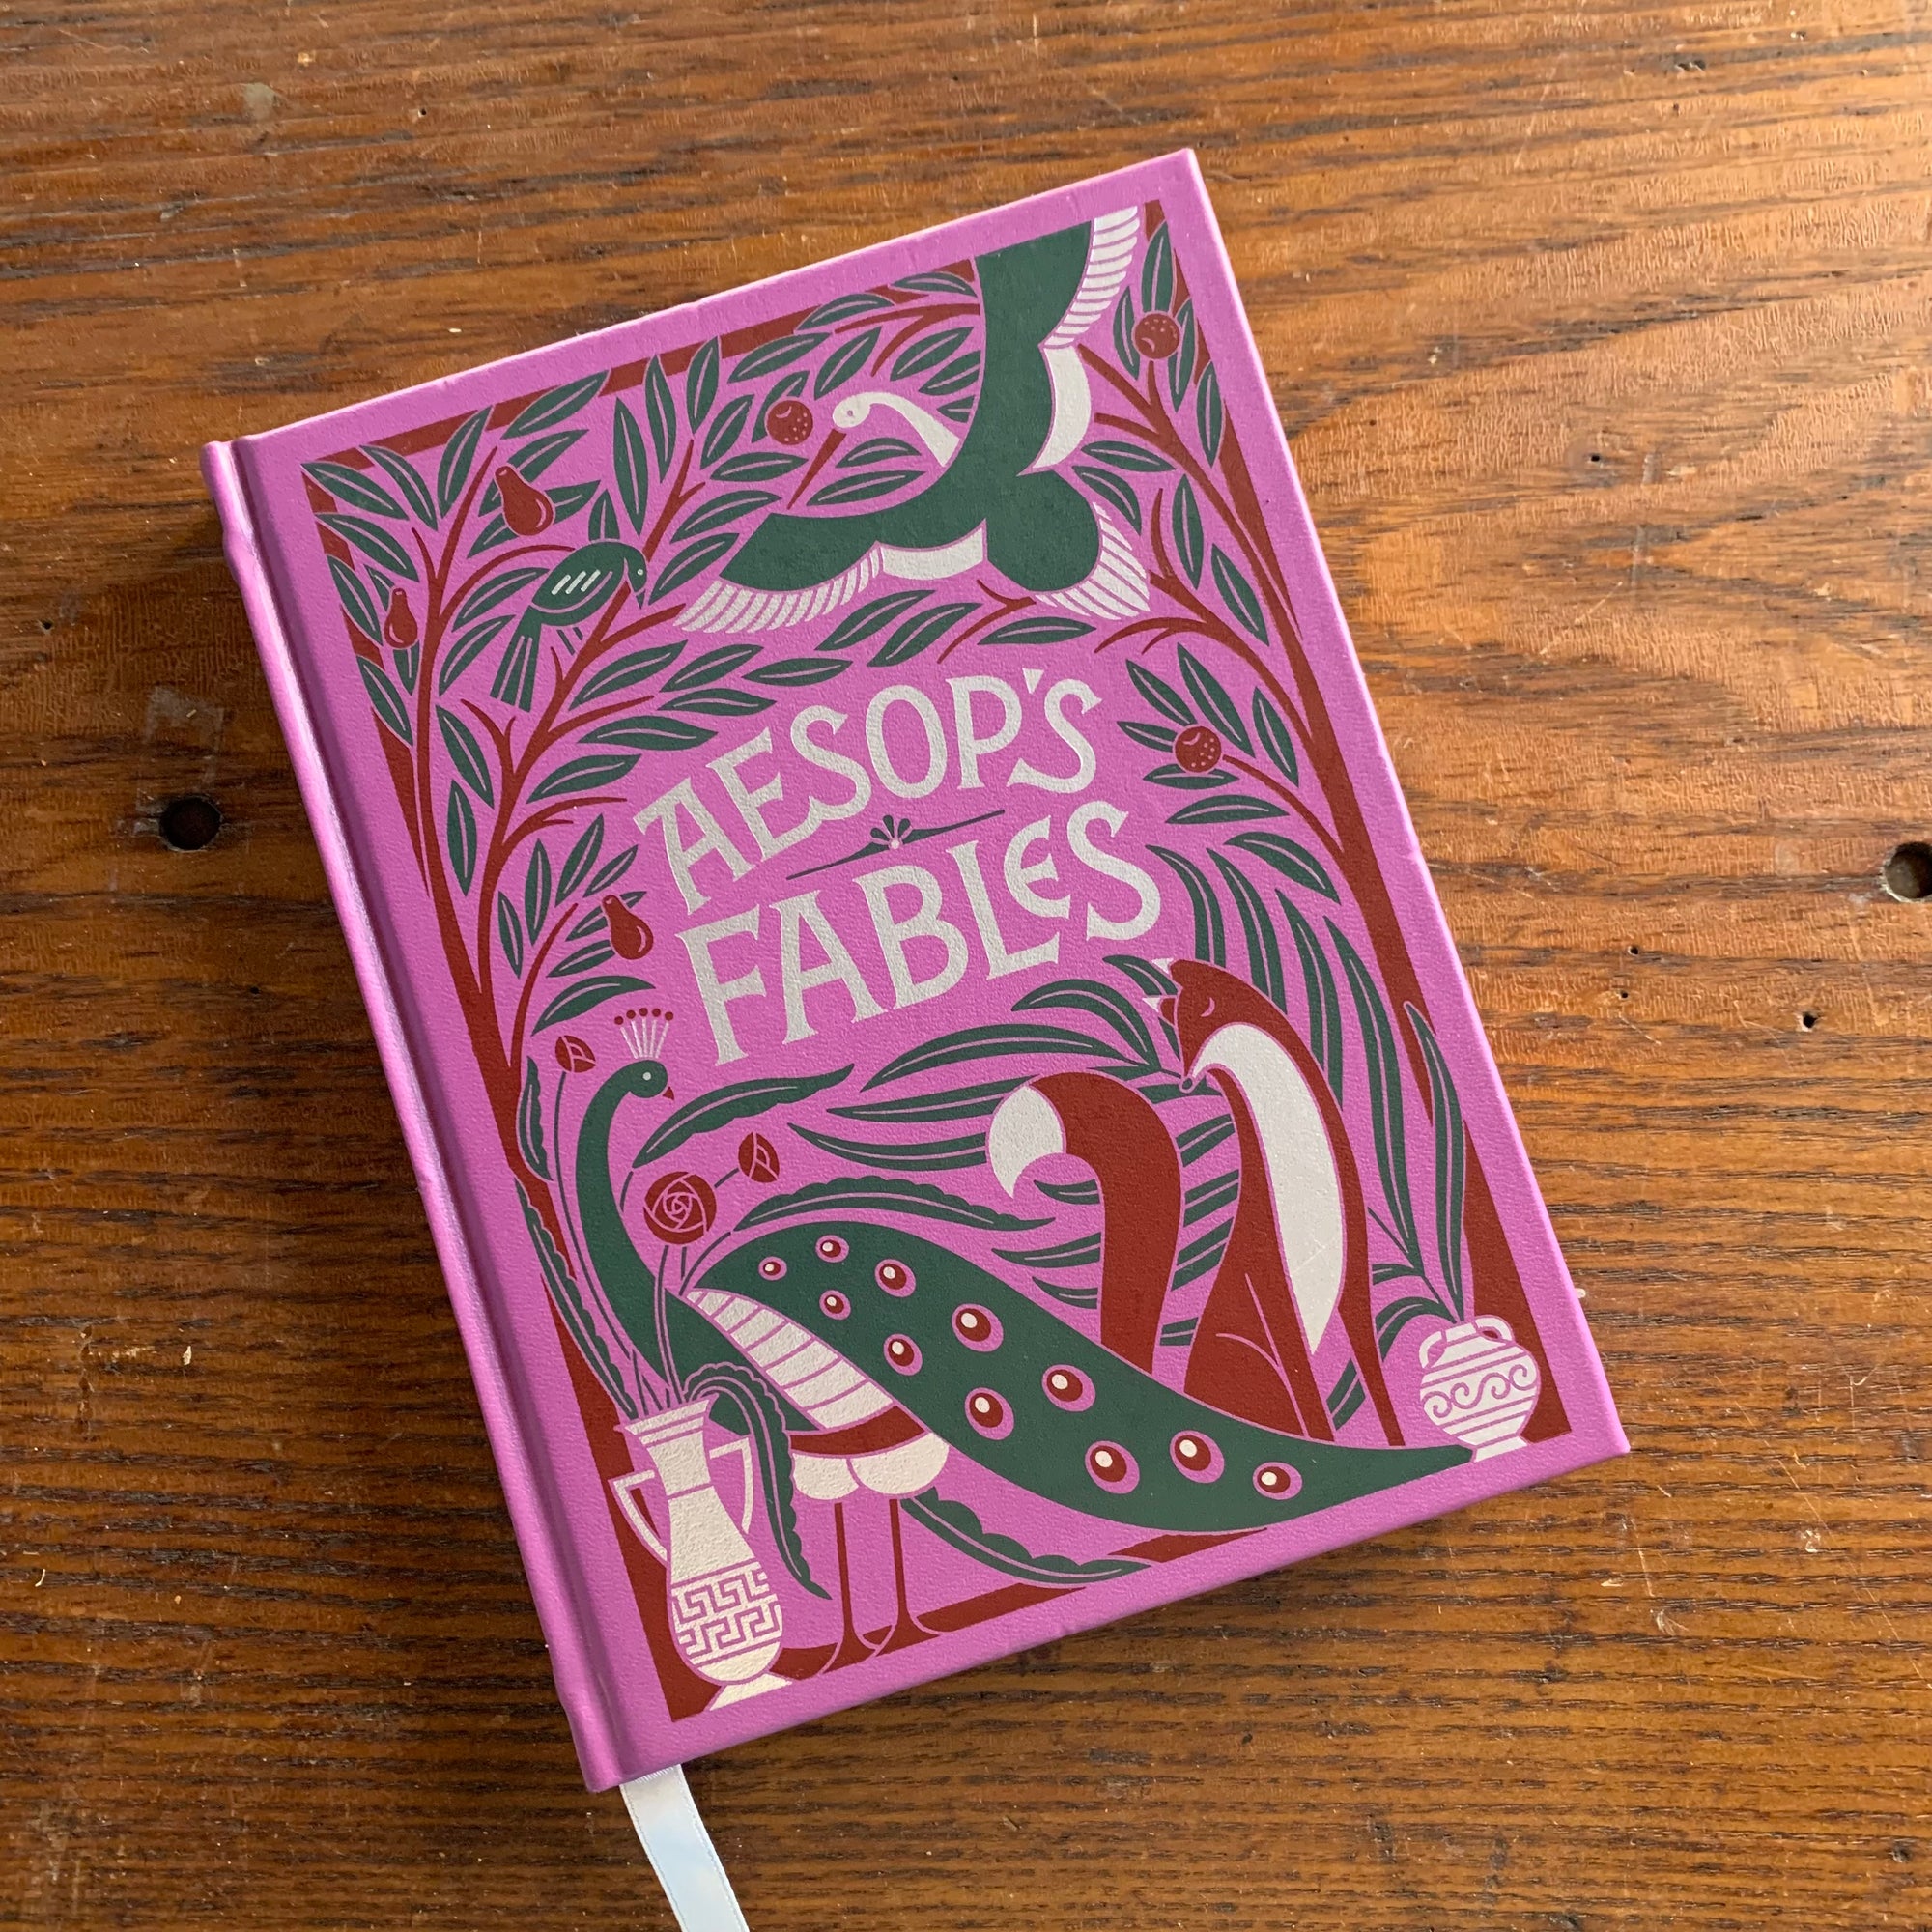 Aesop’s Fables - A 2012 Barnes & Noble Leather-Bound Edition